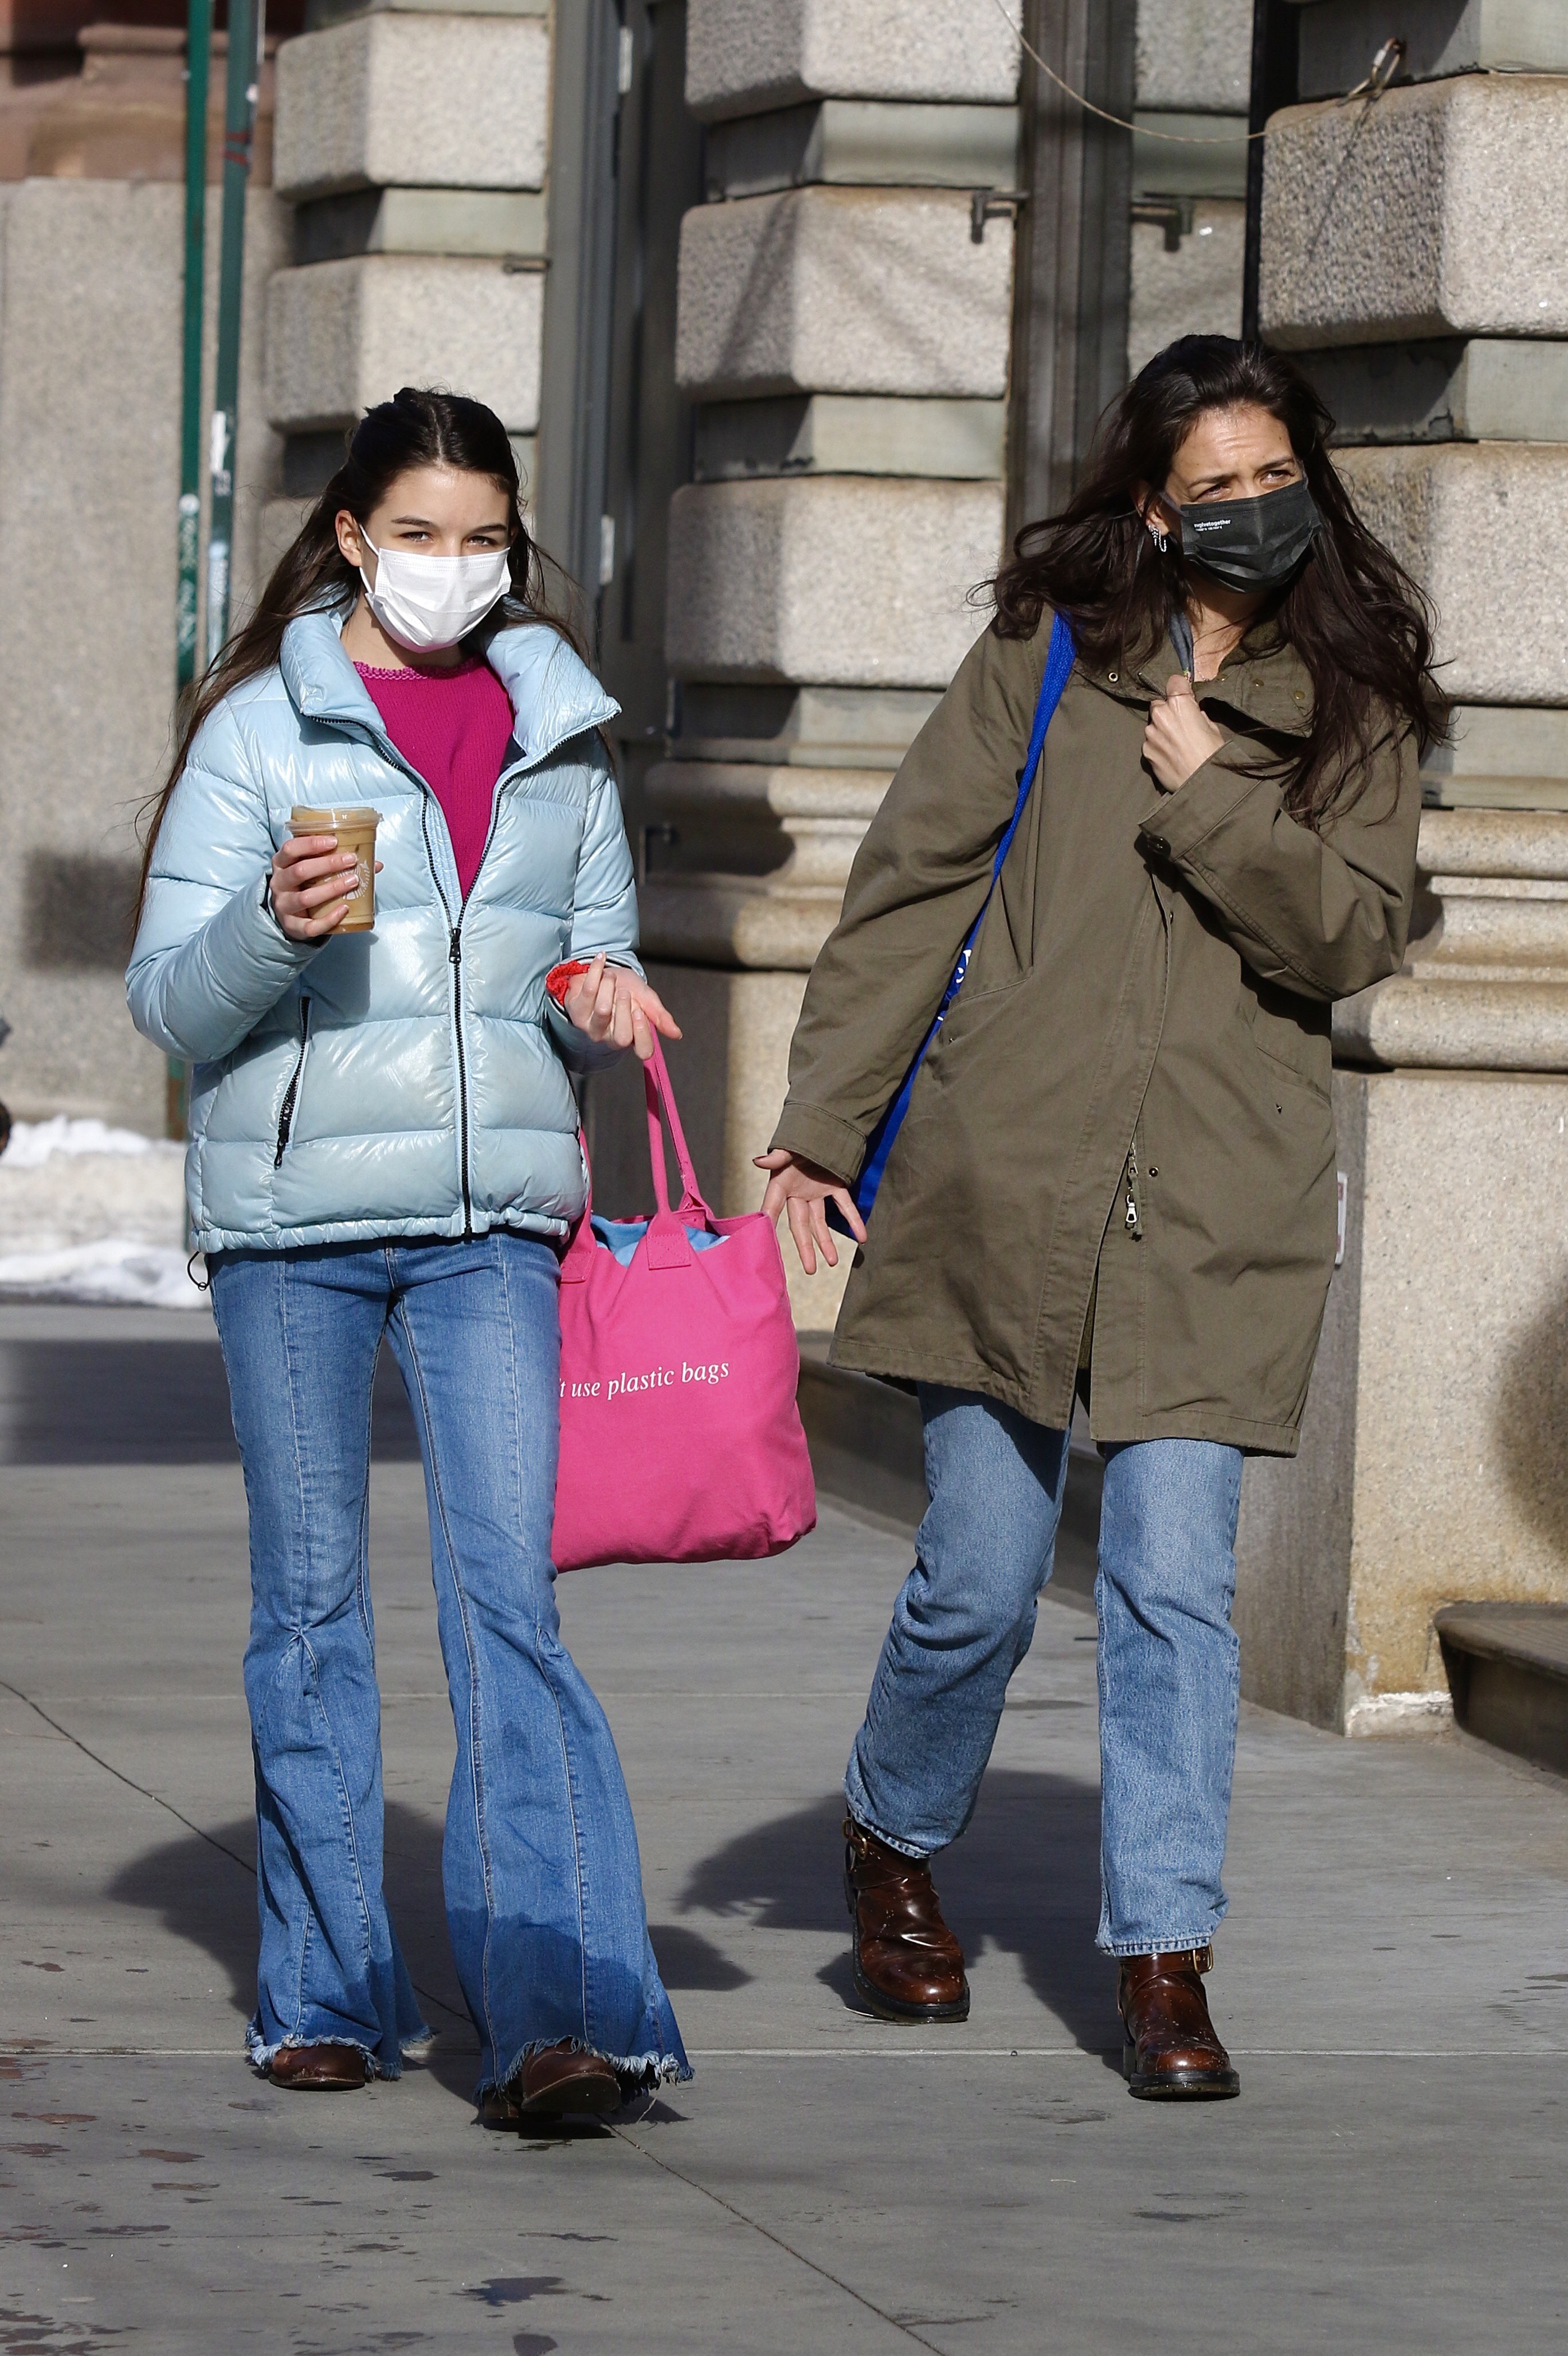 Katie Holmes and Suri Cruise seen on February 6, 2021 in New York City | Source: Getty Images